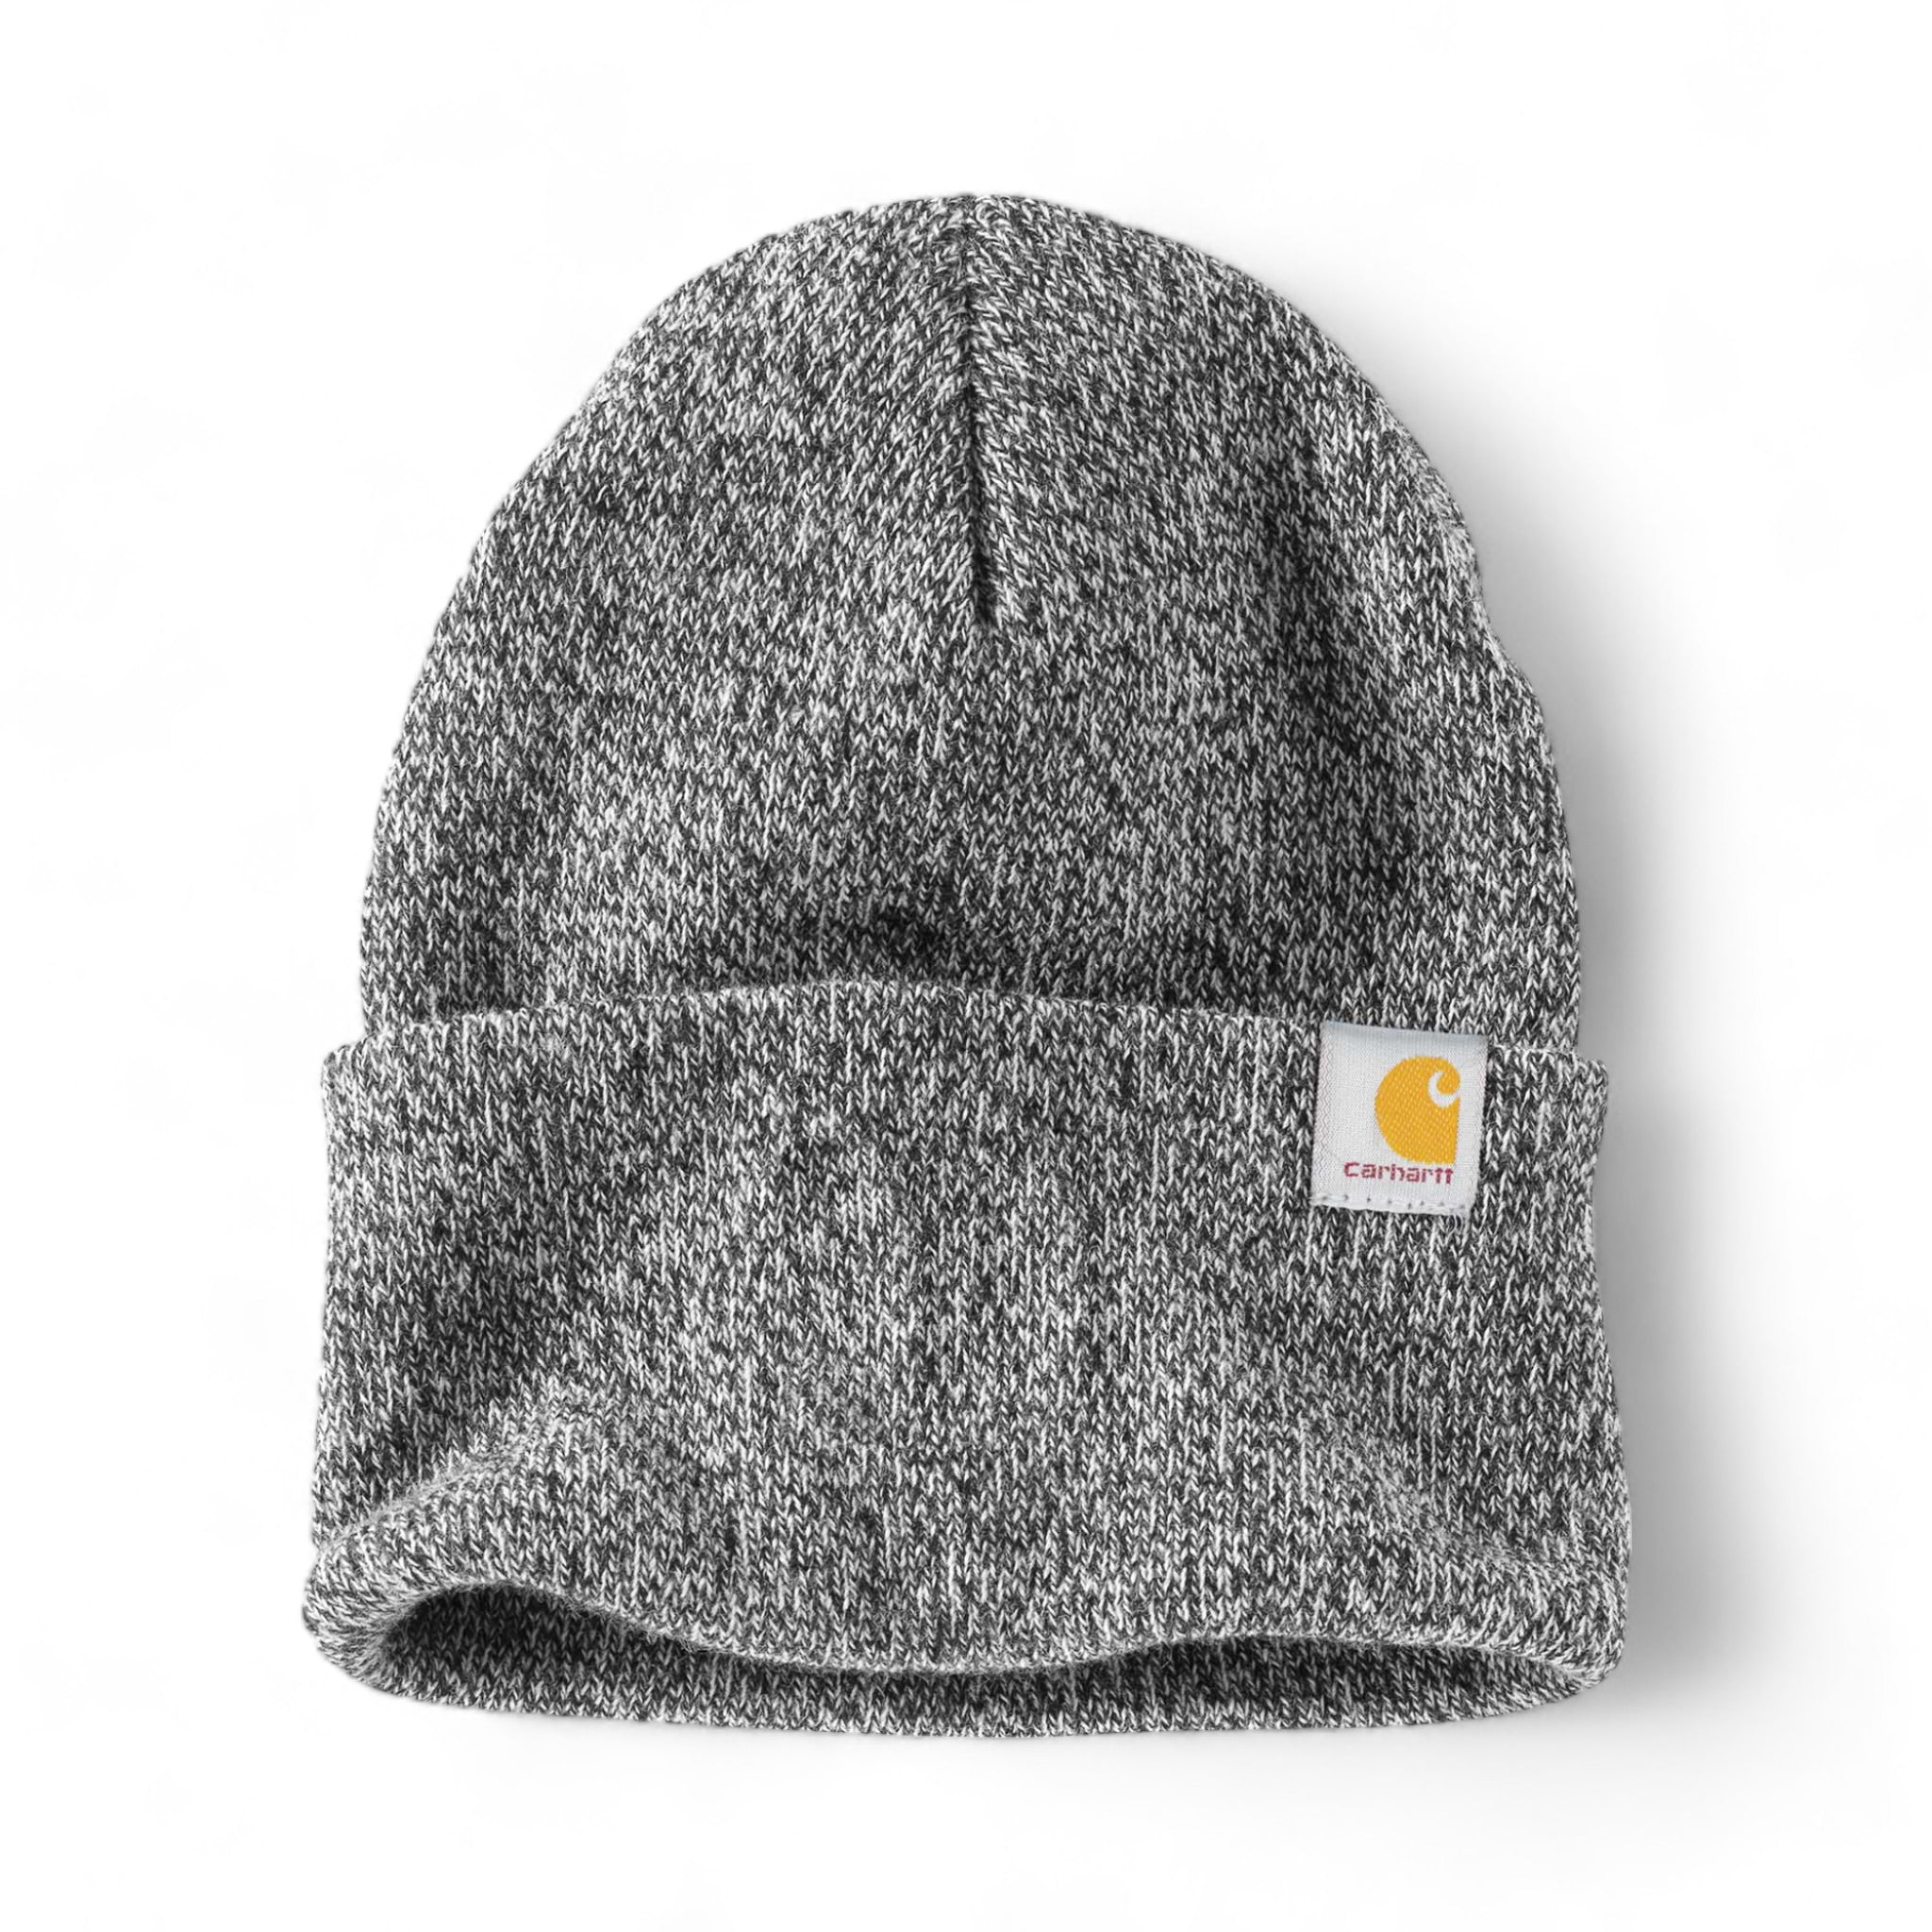 Front view of Carhartt CT104597 custom hat in black and white